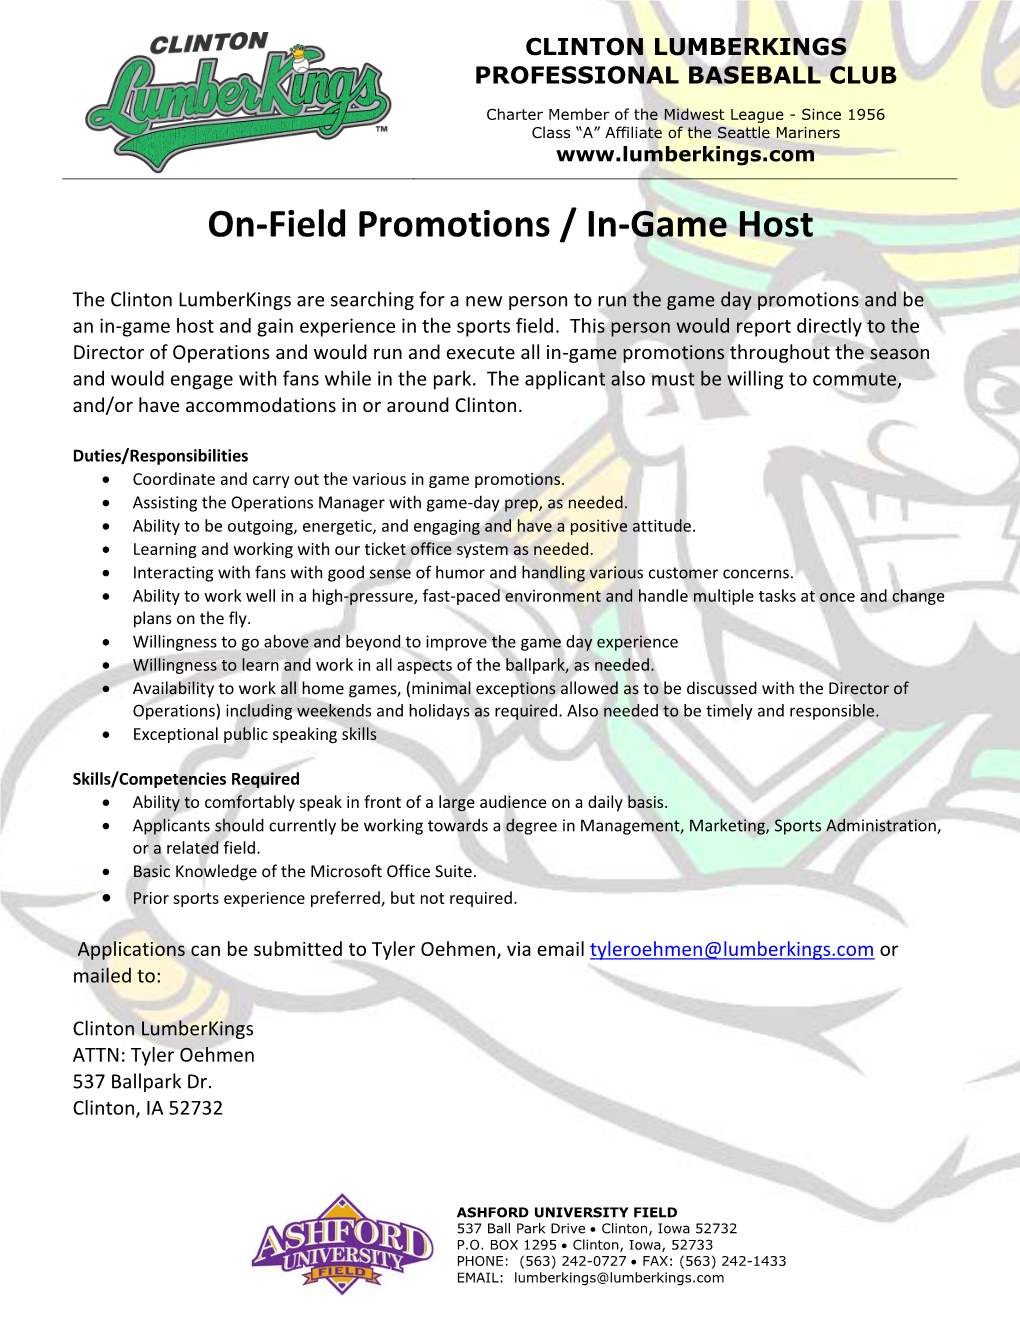 On-Field Promotions / In-Game Host